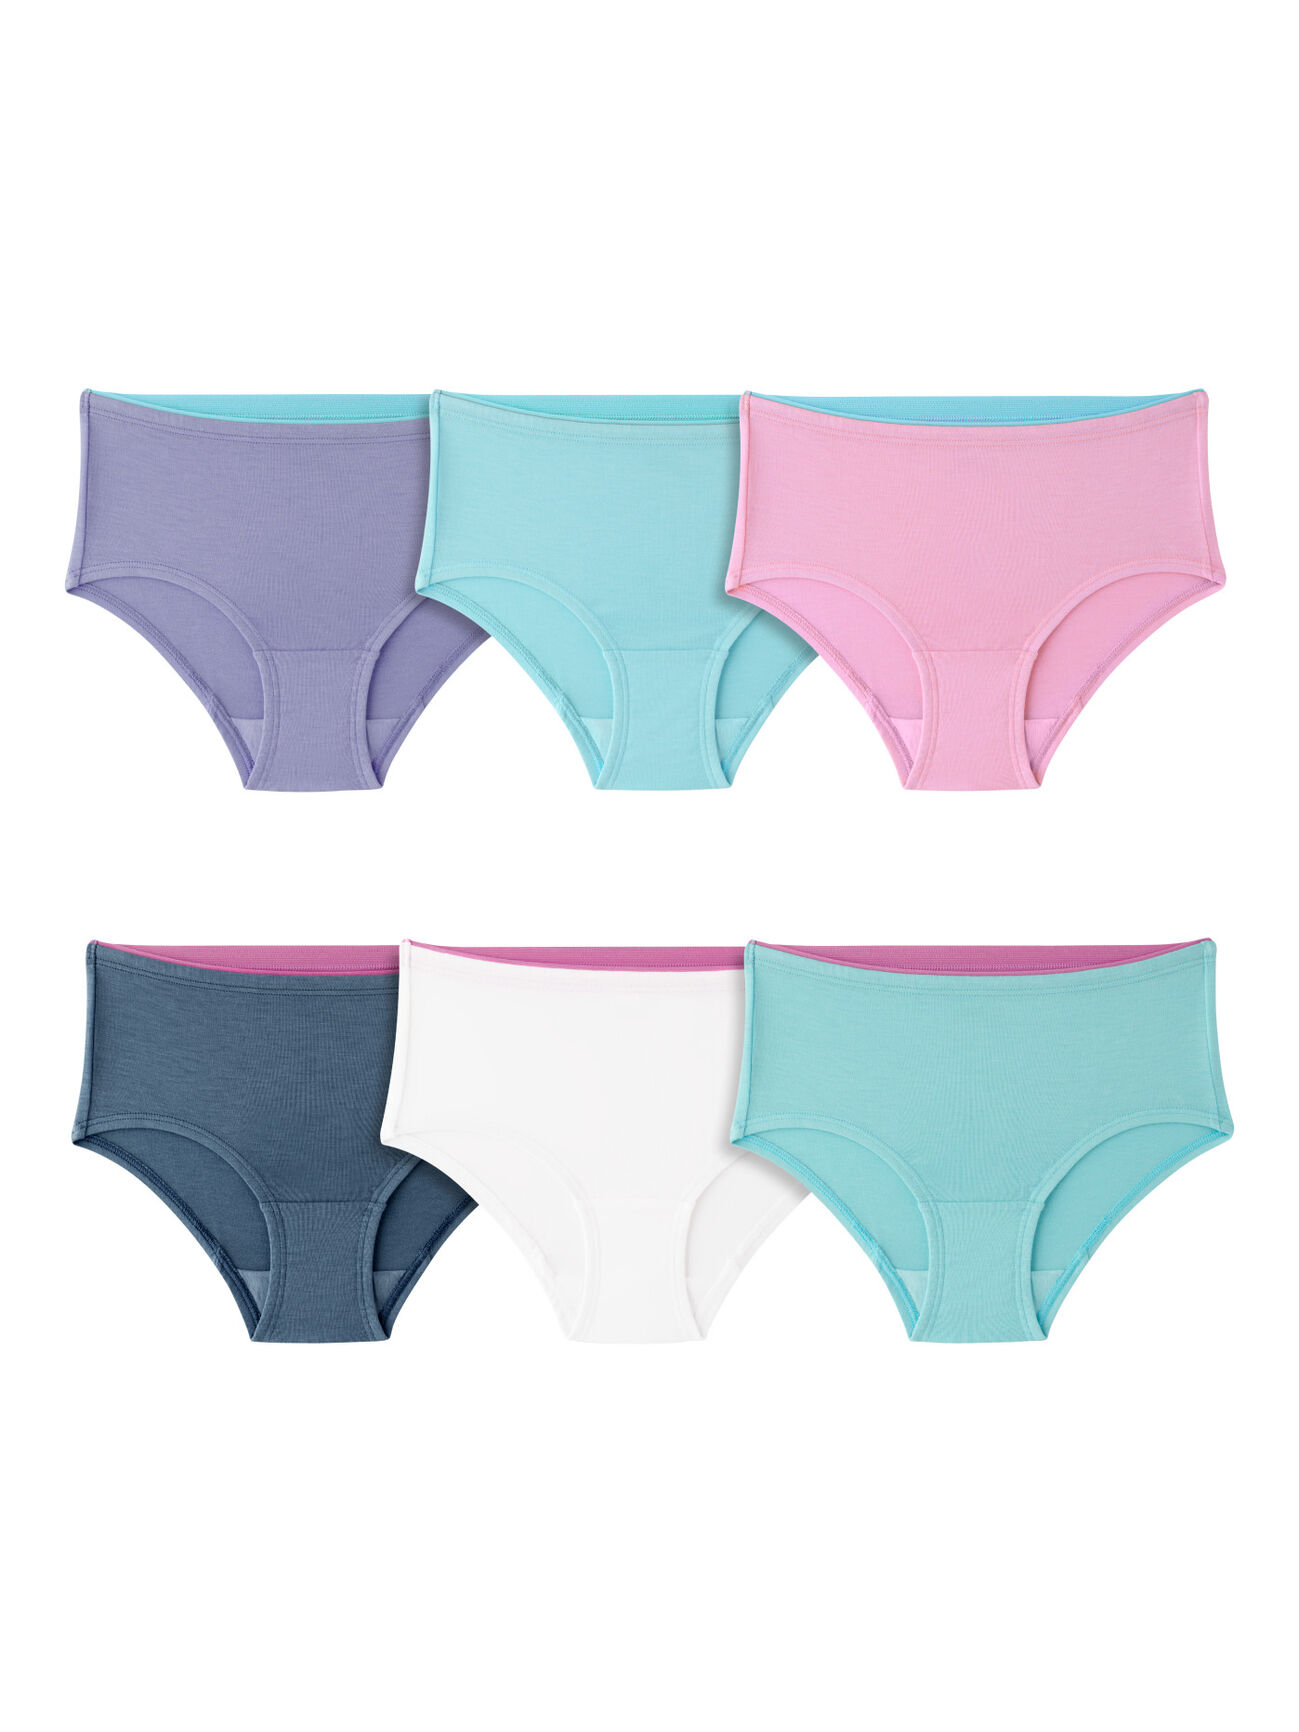 Lightweight Girls Breathable Briefs Women Cotton Solid Color Cute